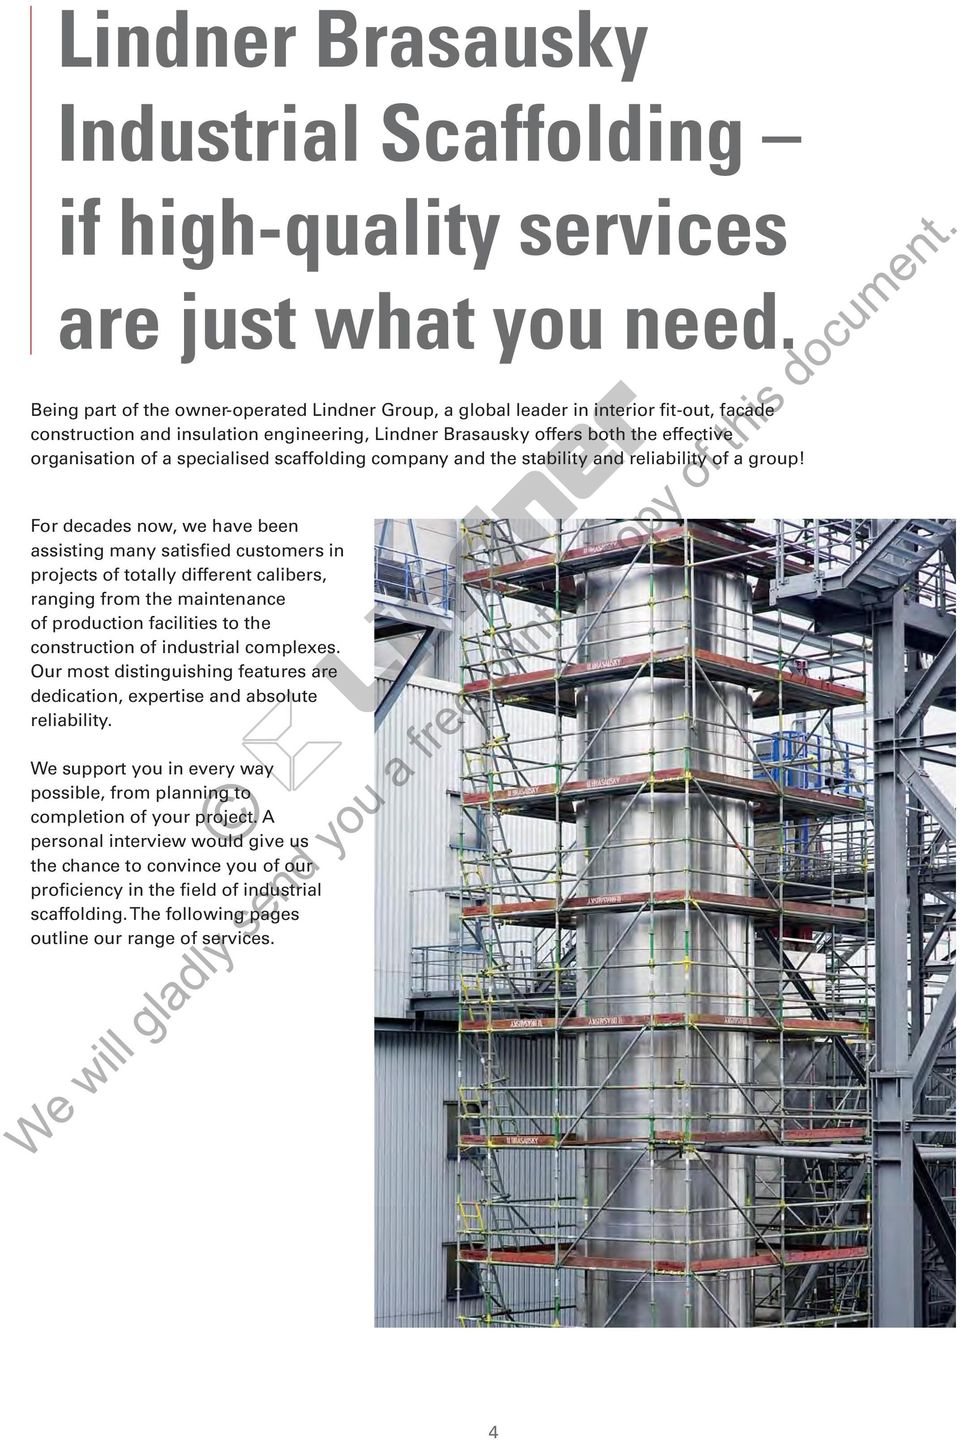 specialised scaffolding company and the stability and reliability of a group!